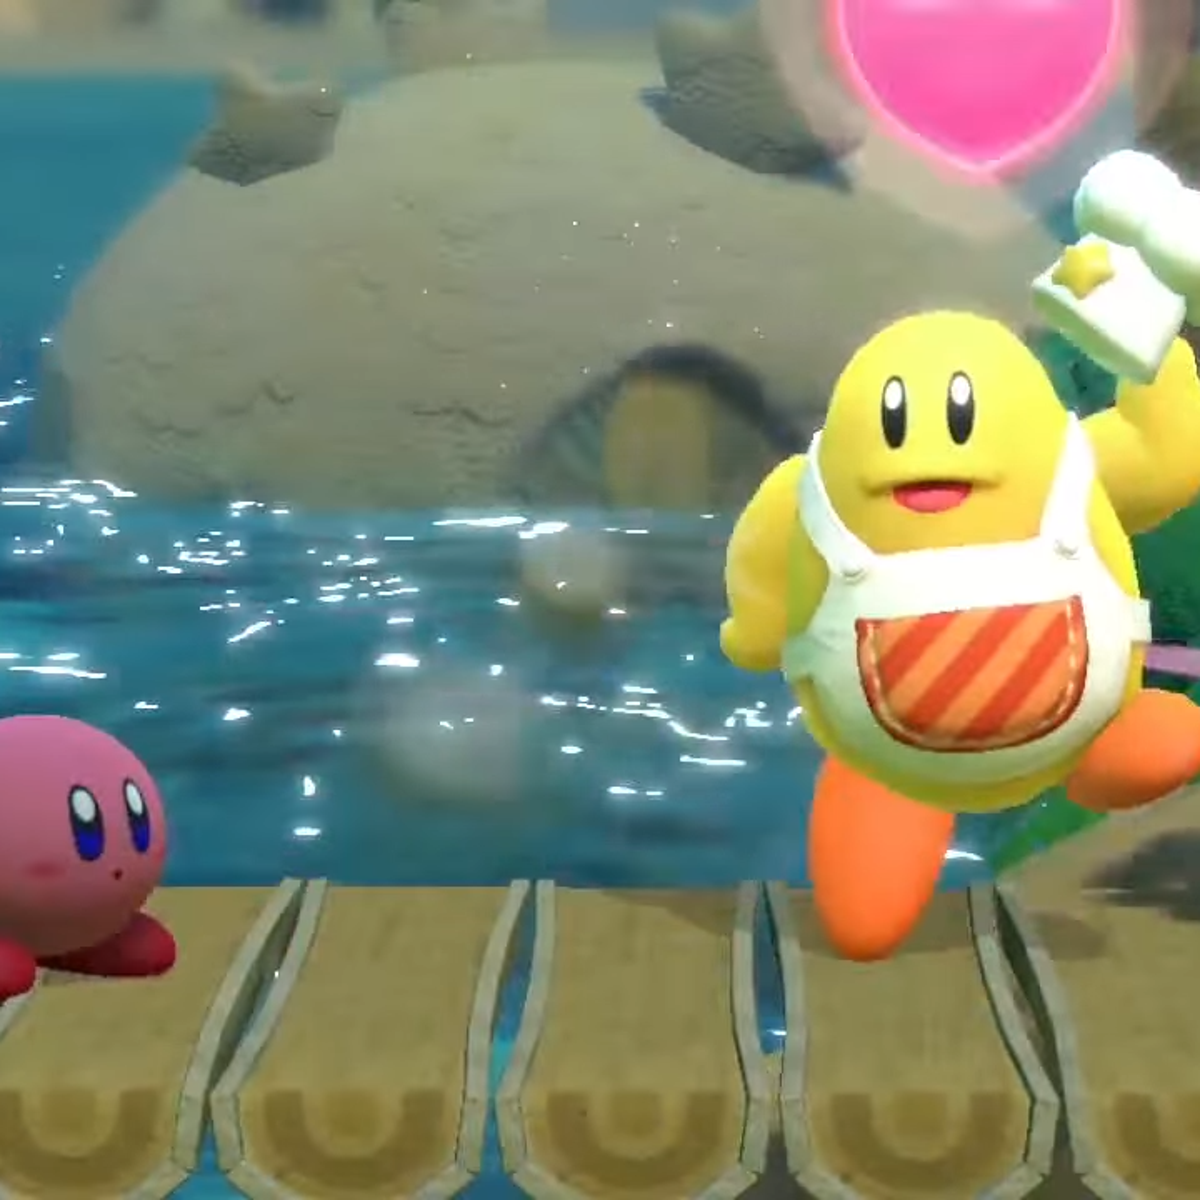 HAL Laboratory Teases New Kirby Games In 2021